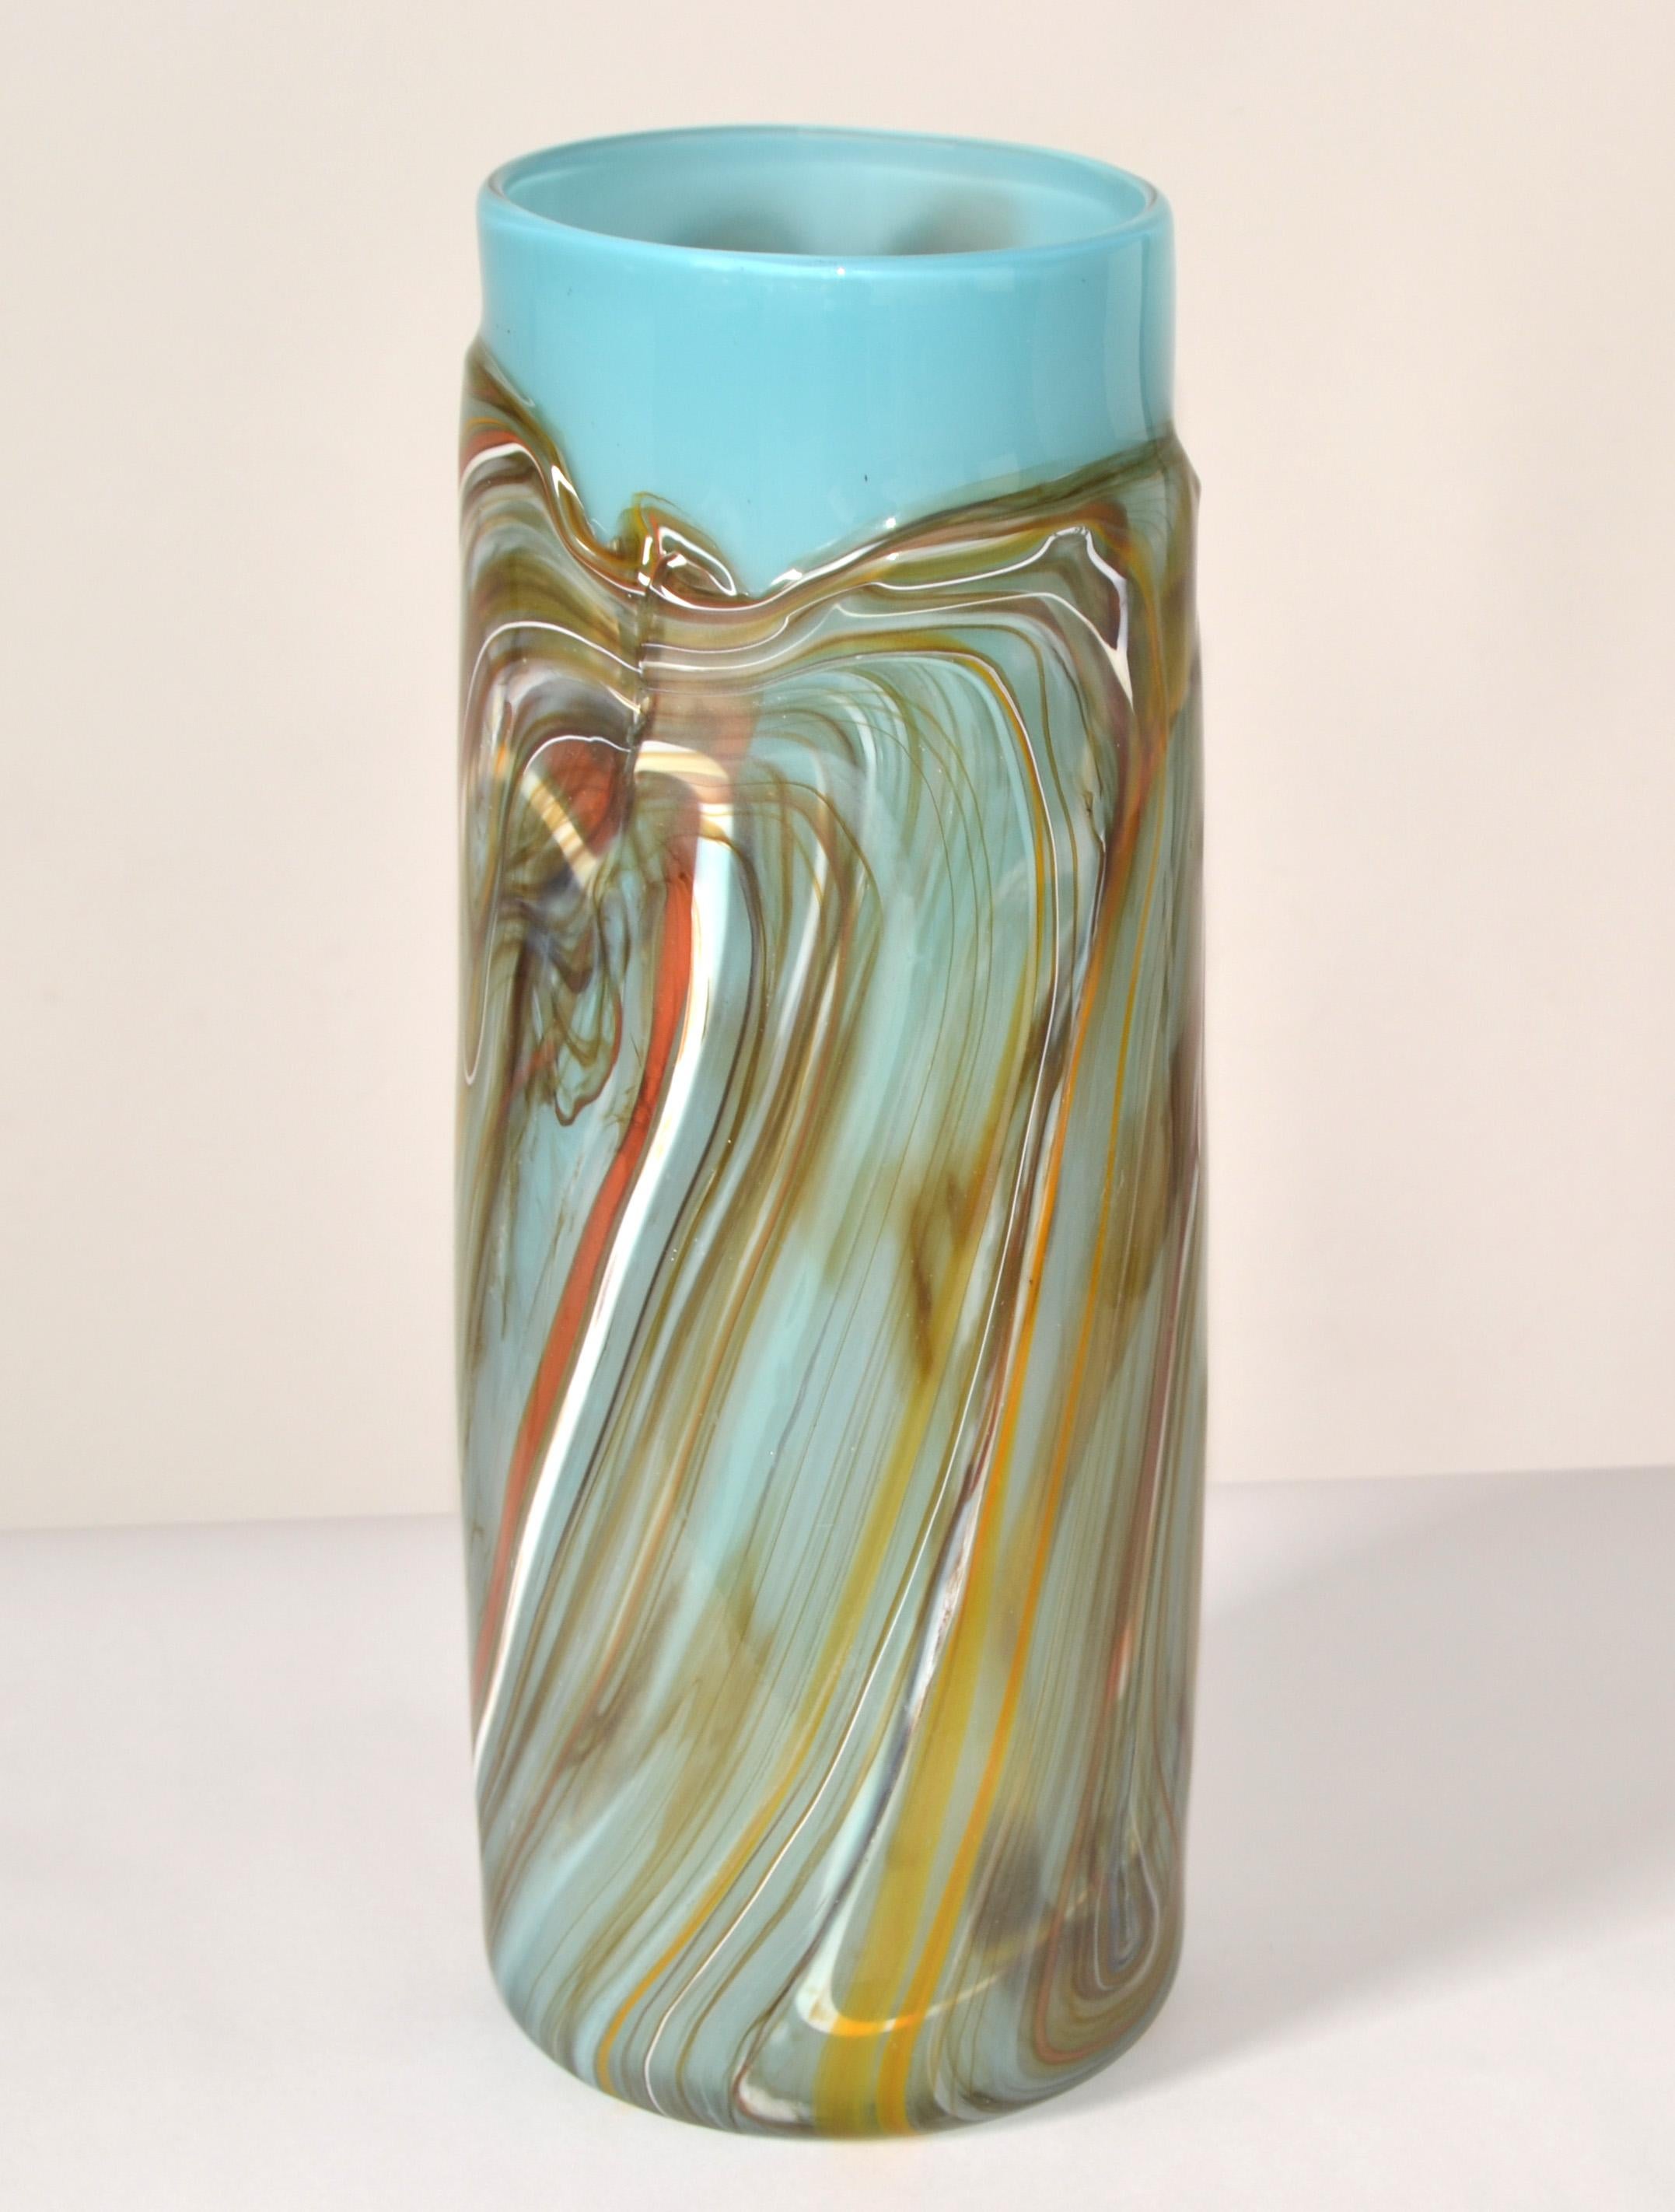 Vintage Studio Art Blown Glass Heavy Vase Vessel Turquoise and Hues Brown 1975 For Sale 6